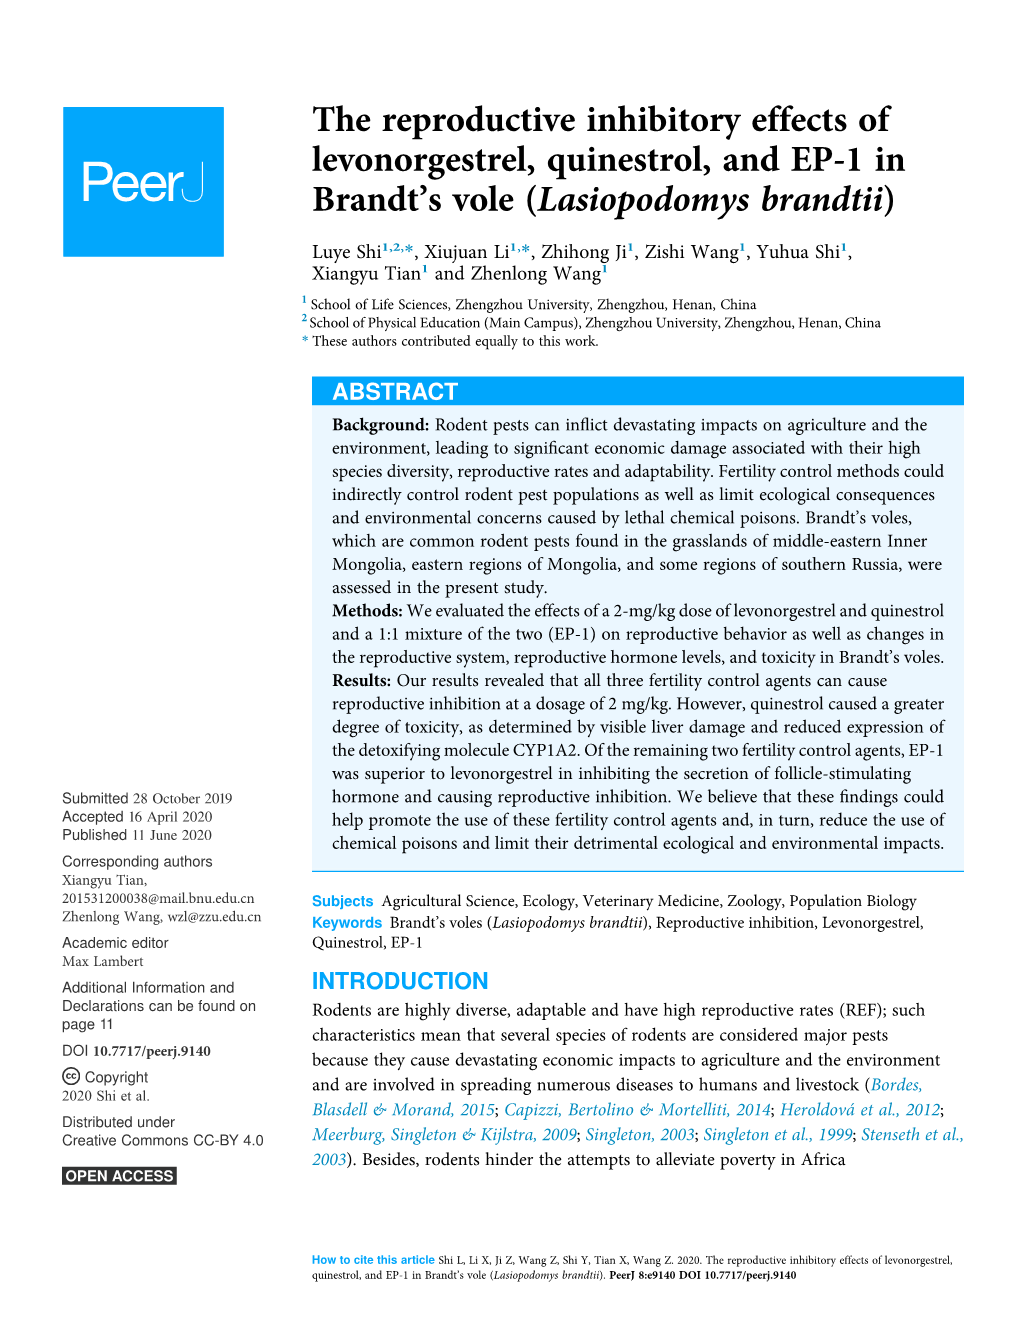 The Reproductive Inhibitory Effects of Levonorgestrel, Quinestrol, and EP-1 in Brandt's Vole